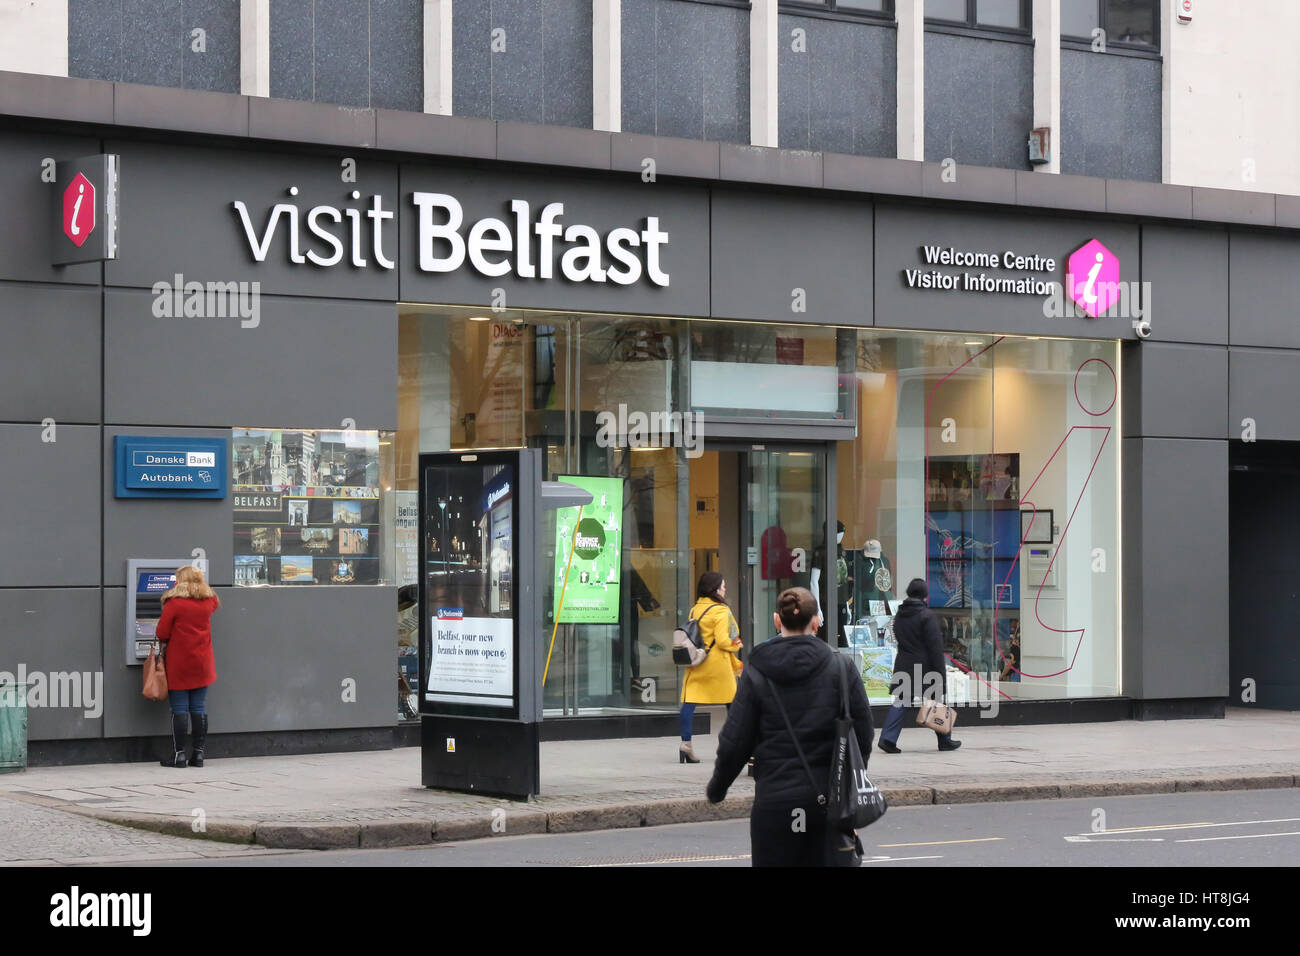 The 'Visit Belfast' tourist information and welcome centre in Belfast city centre, Northern Ireland. Stock Photo